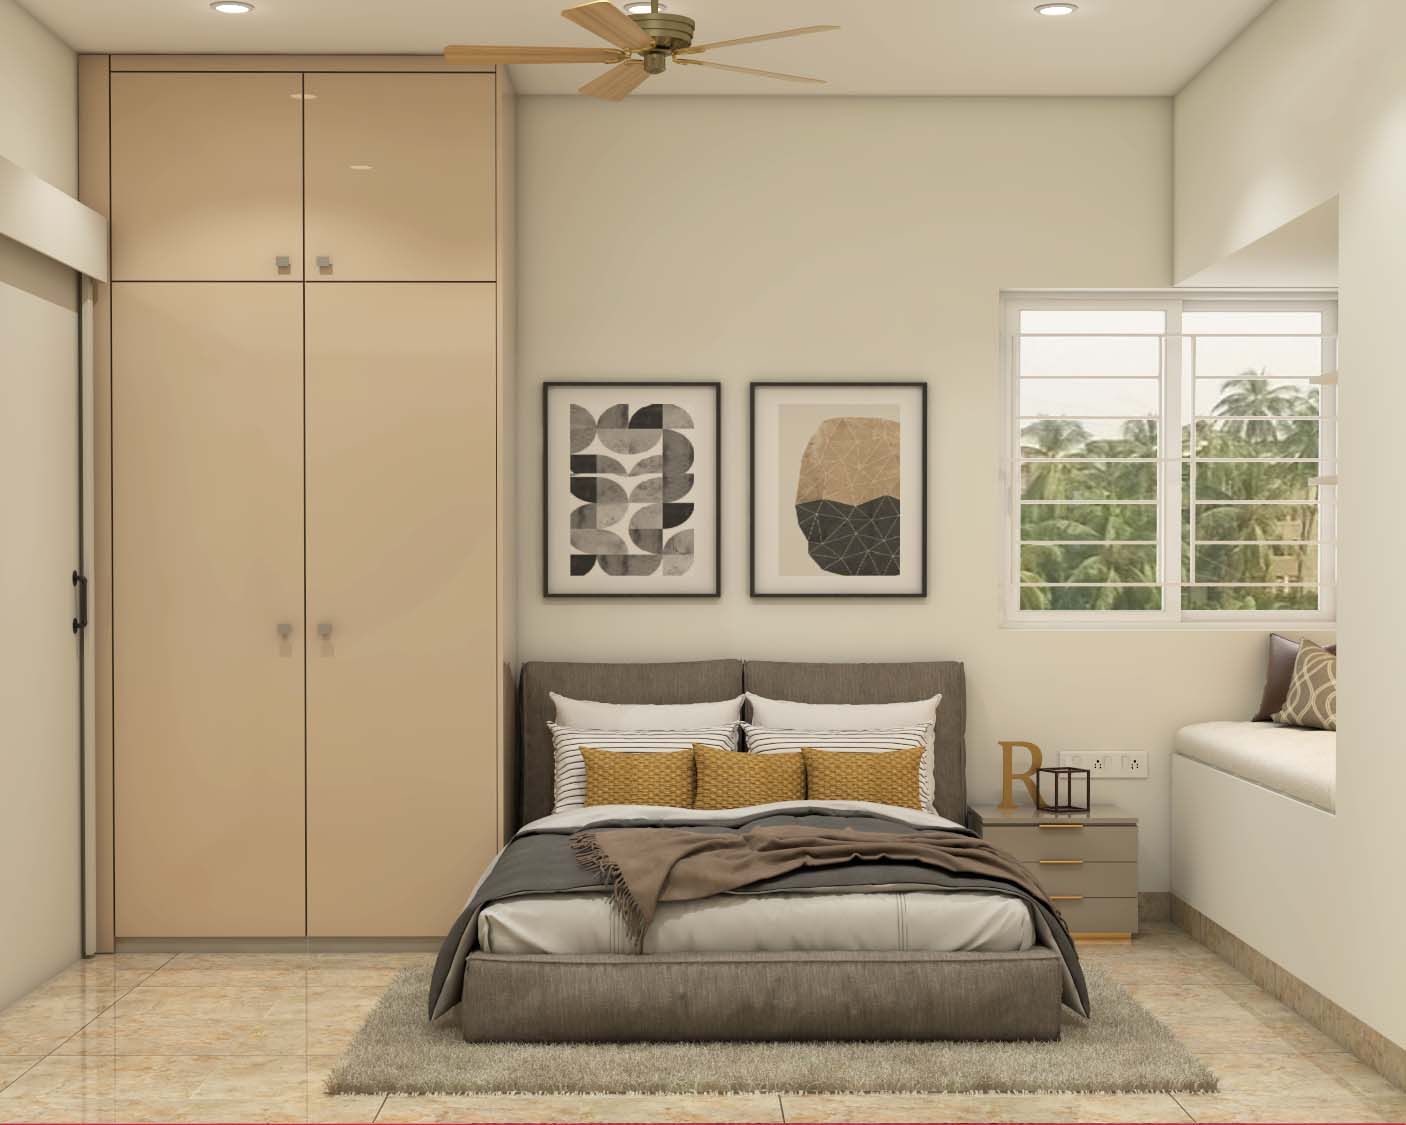 Contemporary Guest Bedroom Design With King Size Bed